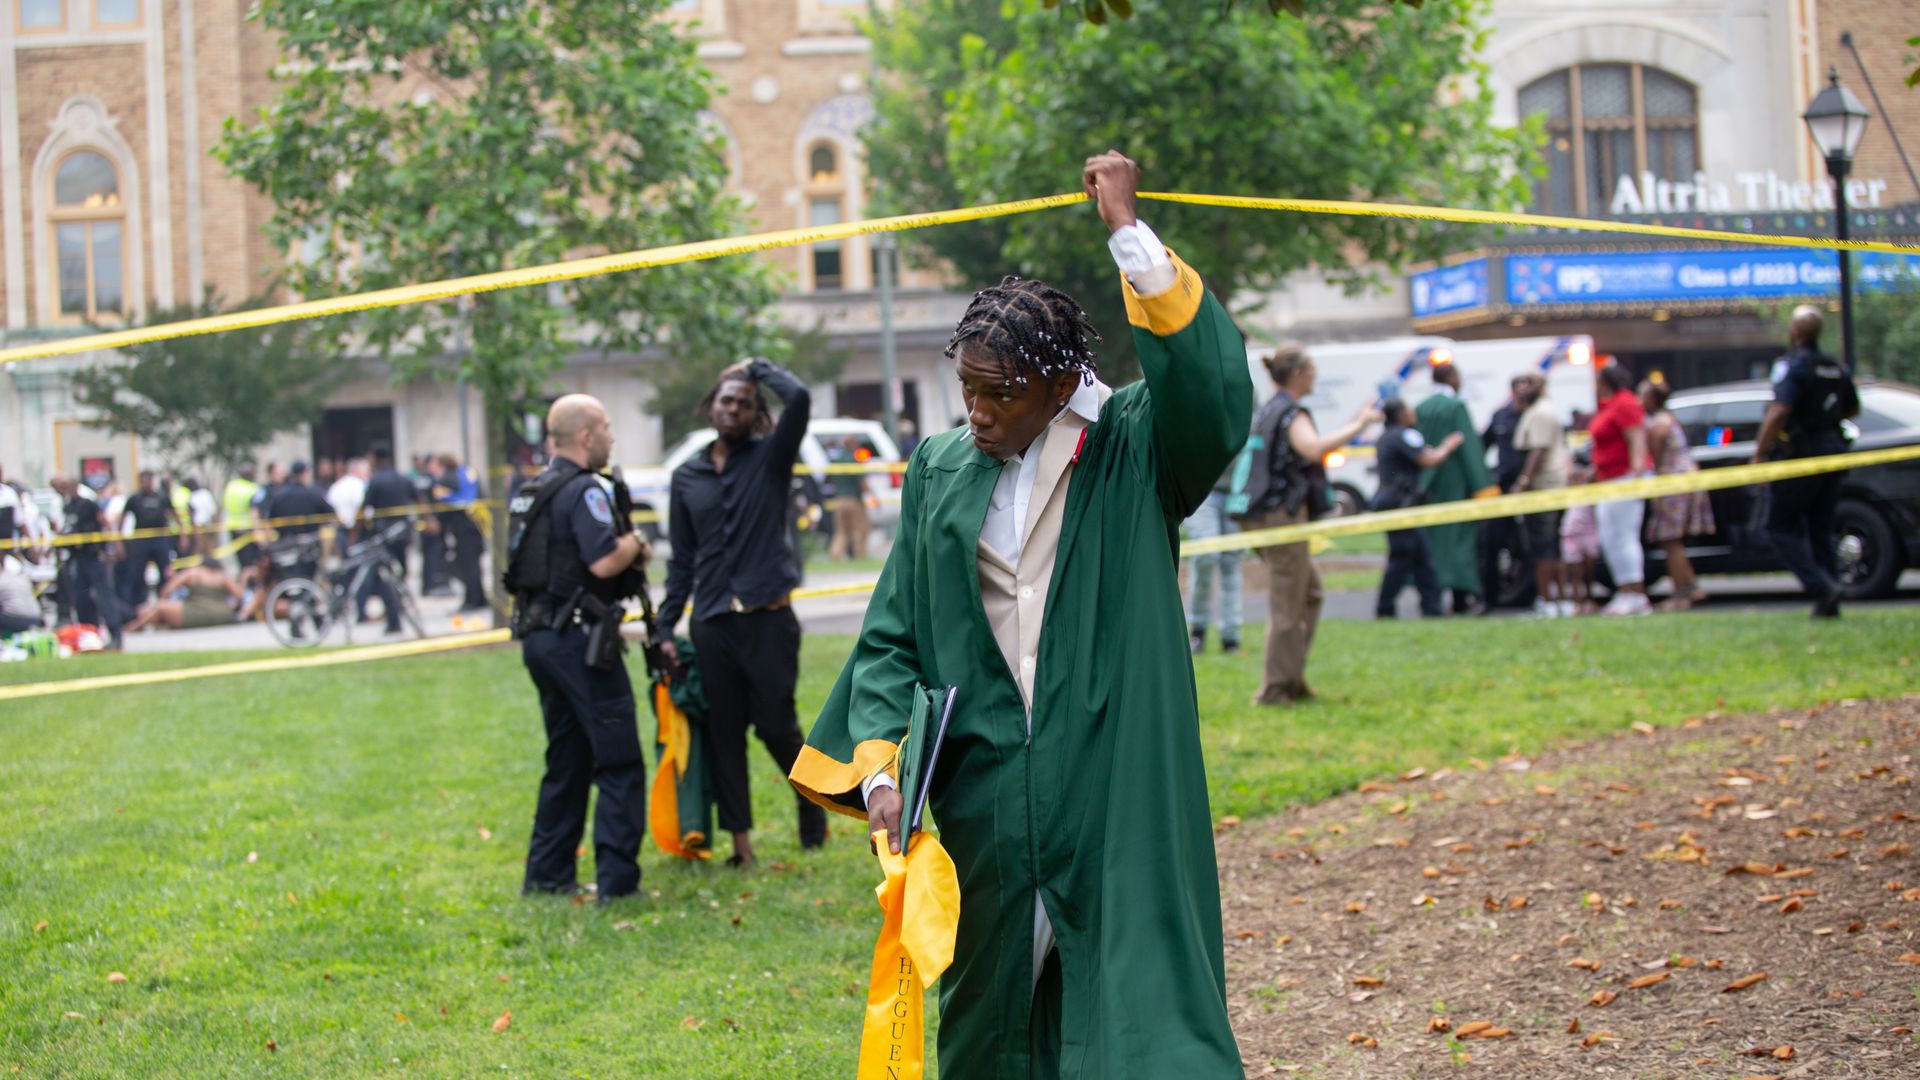  Several people were injured in a shooting outside of the Altria Theatre after the Huguenot High School graduation ceremony in Richmond, Va., June 6, 2023.